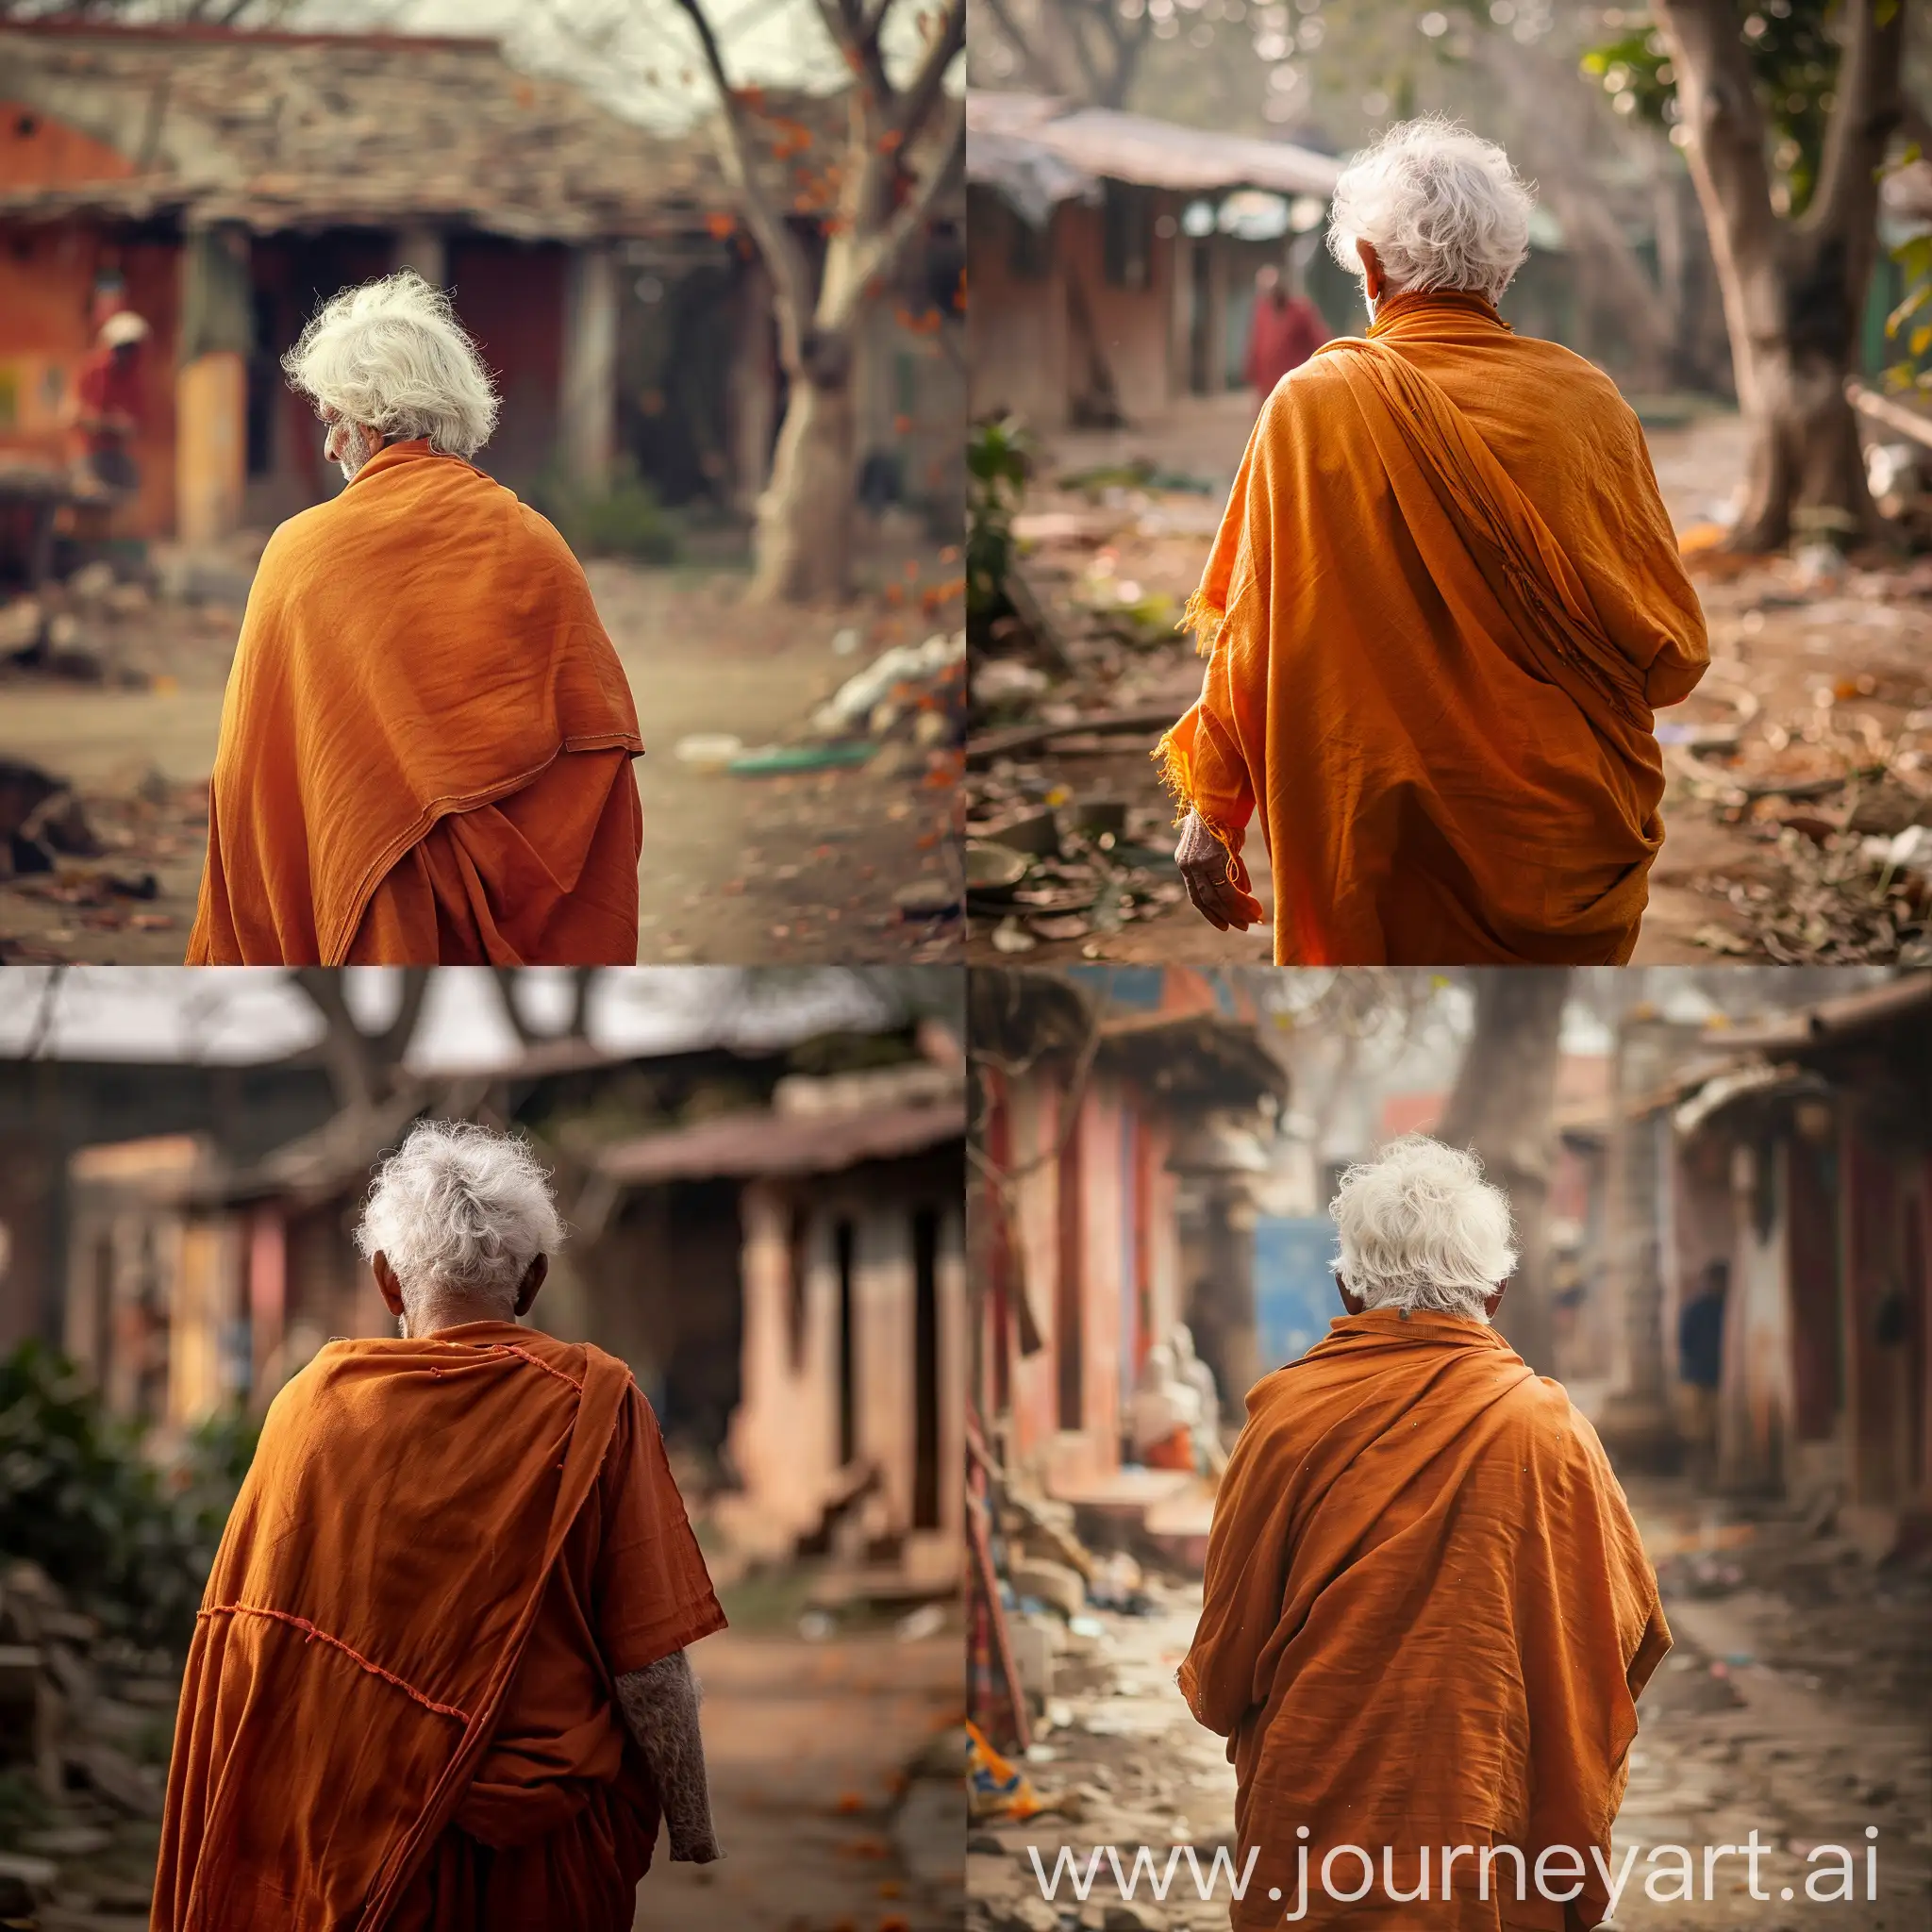 Old man in saffron shawl and white hair walking in an Indian village with his back to us